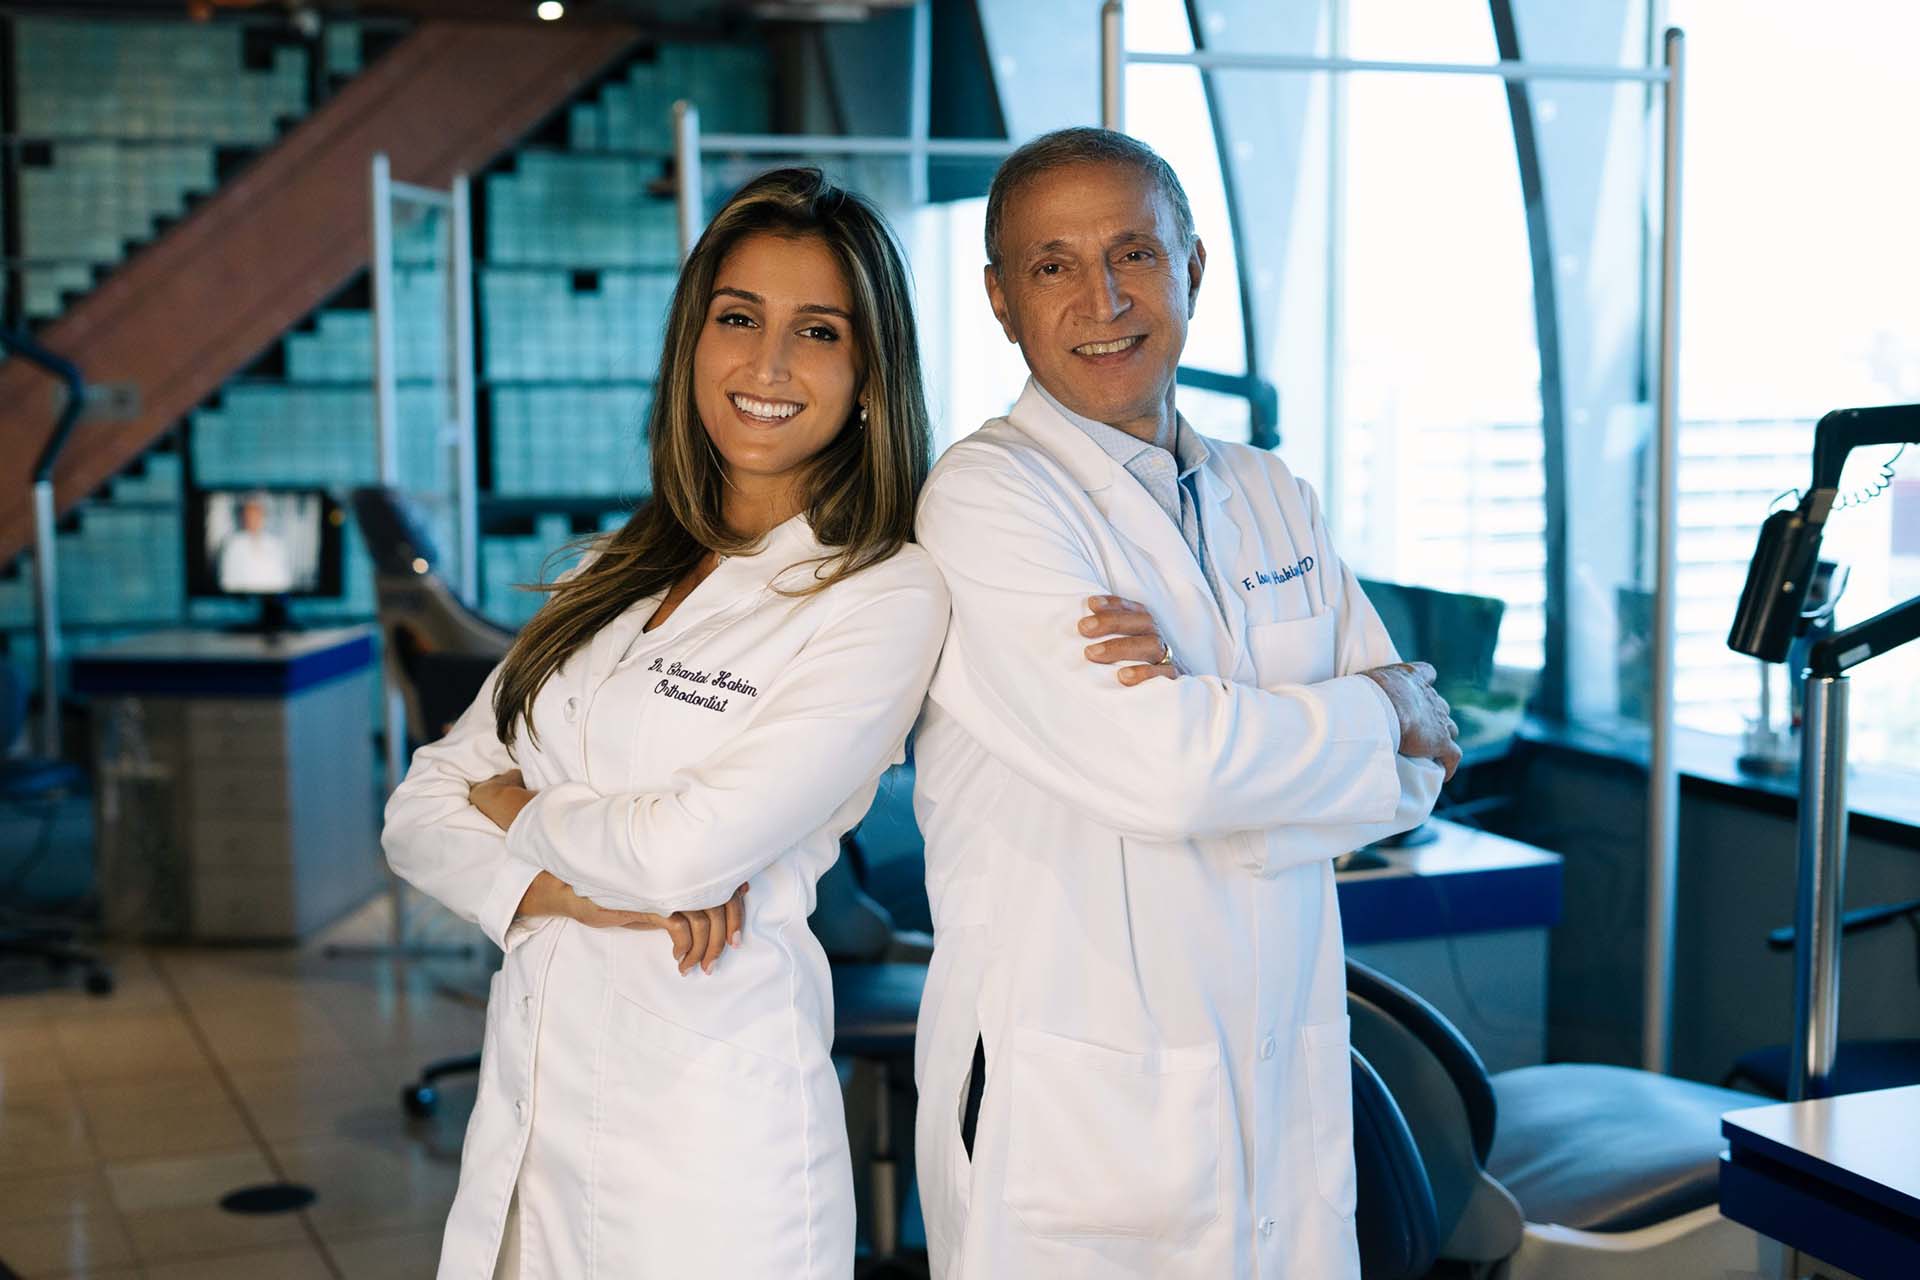 Dr. Chantal Hakim and Dr. F. Isaac Hakim at the Orthospaceship in Los Angeles, a Southern California orthodontic practice serving Burbank.